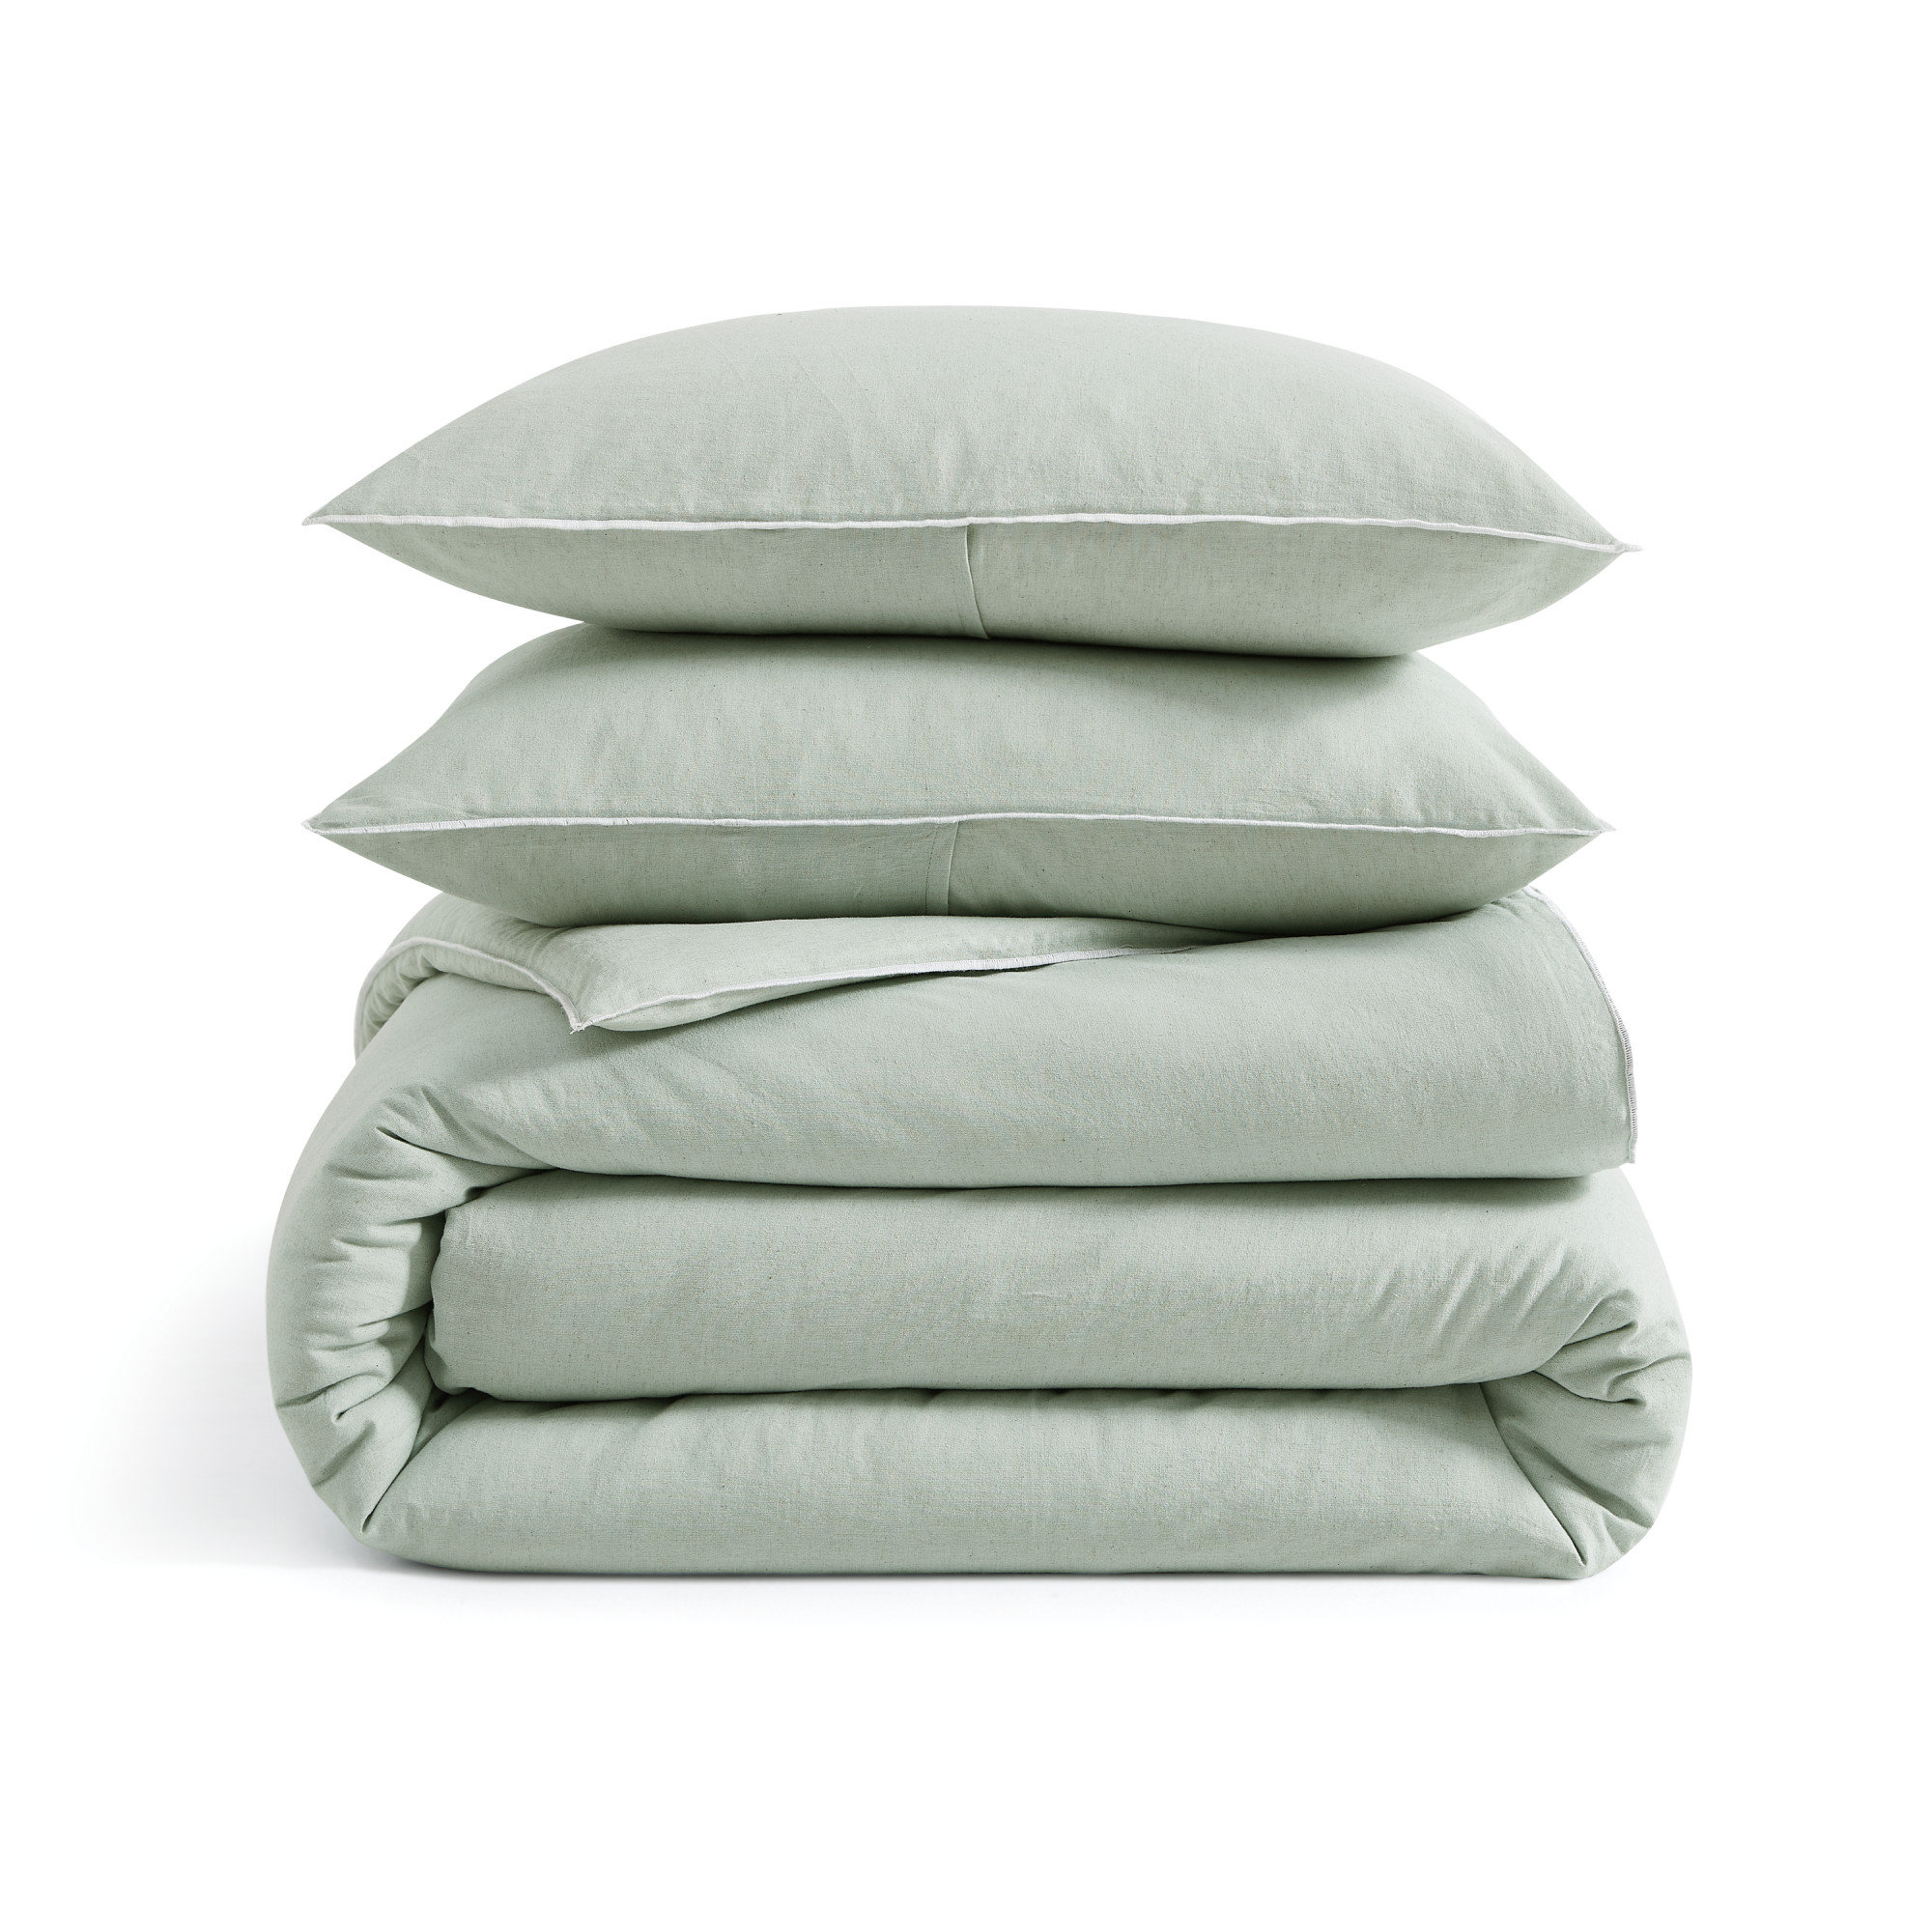 Buy Nautica Premium Cotton Colorblock Pillow Covers -Forest Green